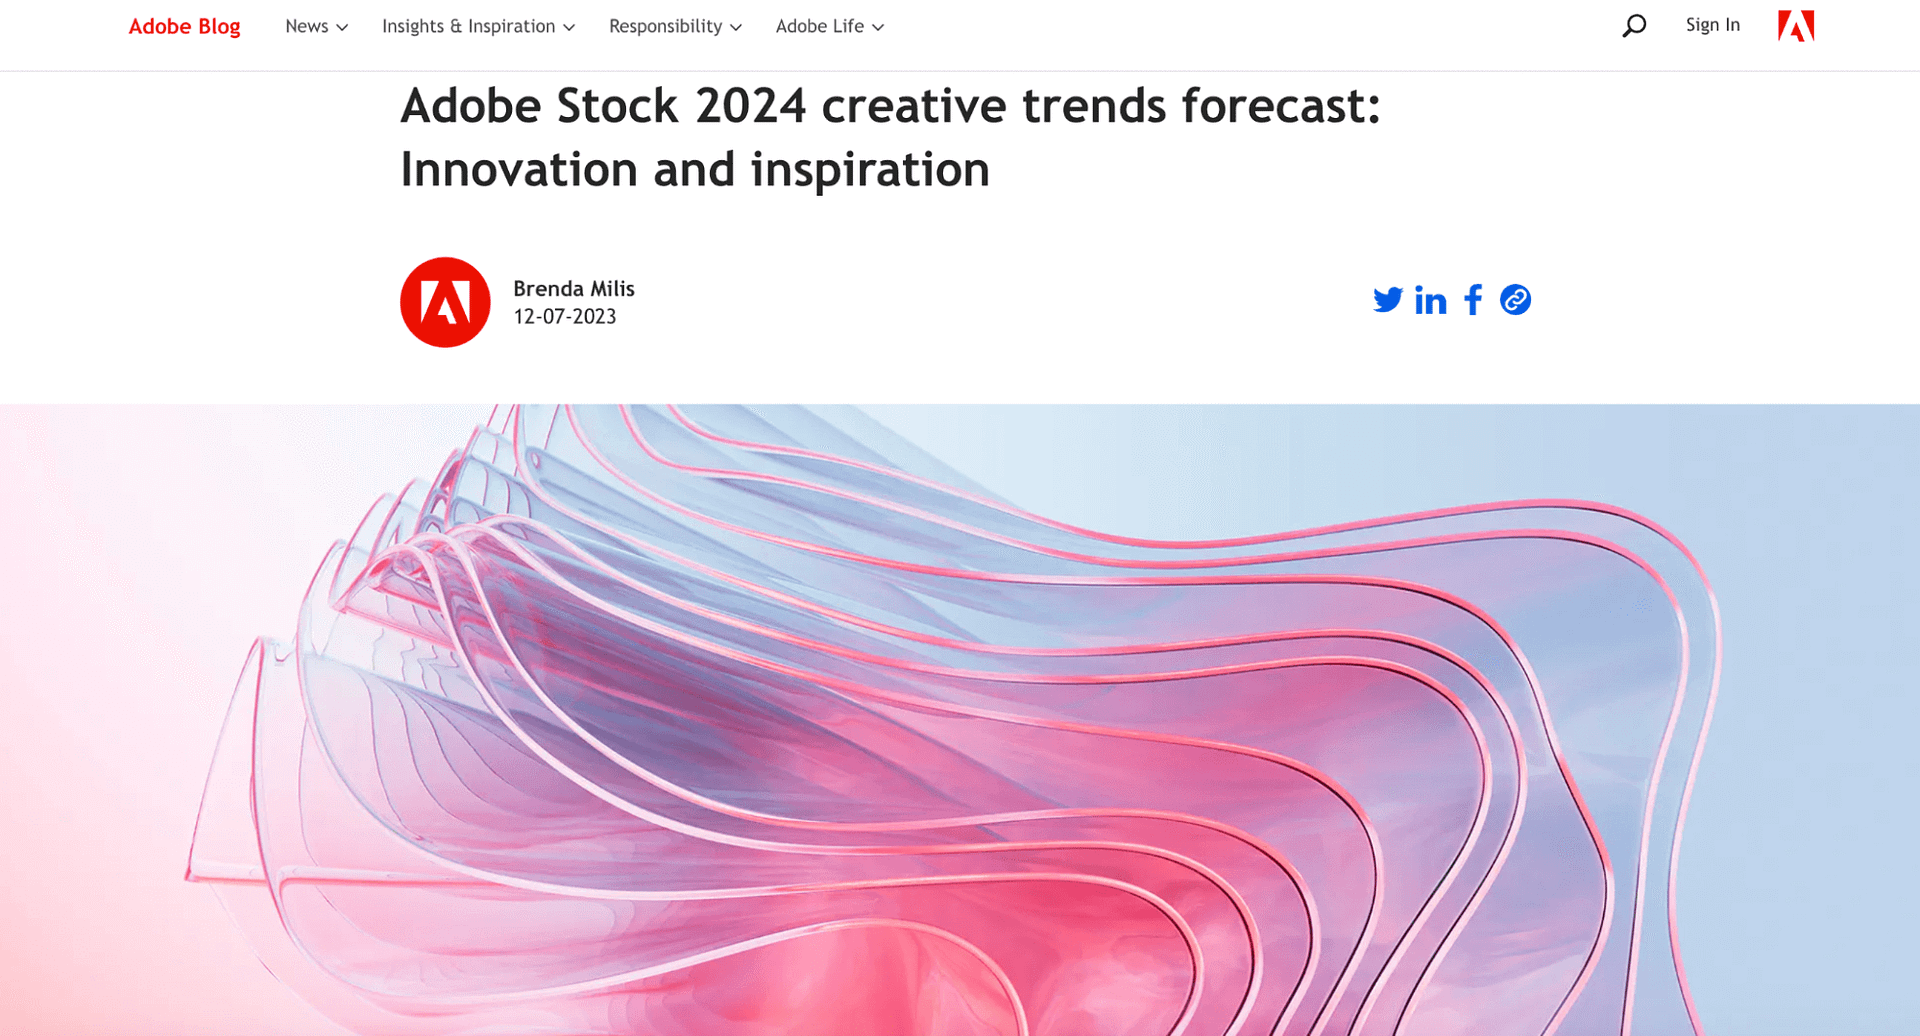 Adobe wrote that surreal, bright and happy images will trend in 2024.